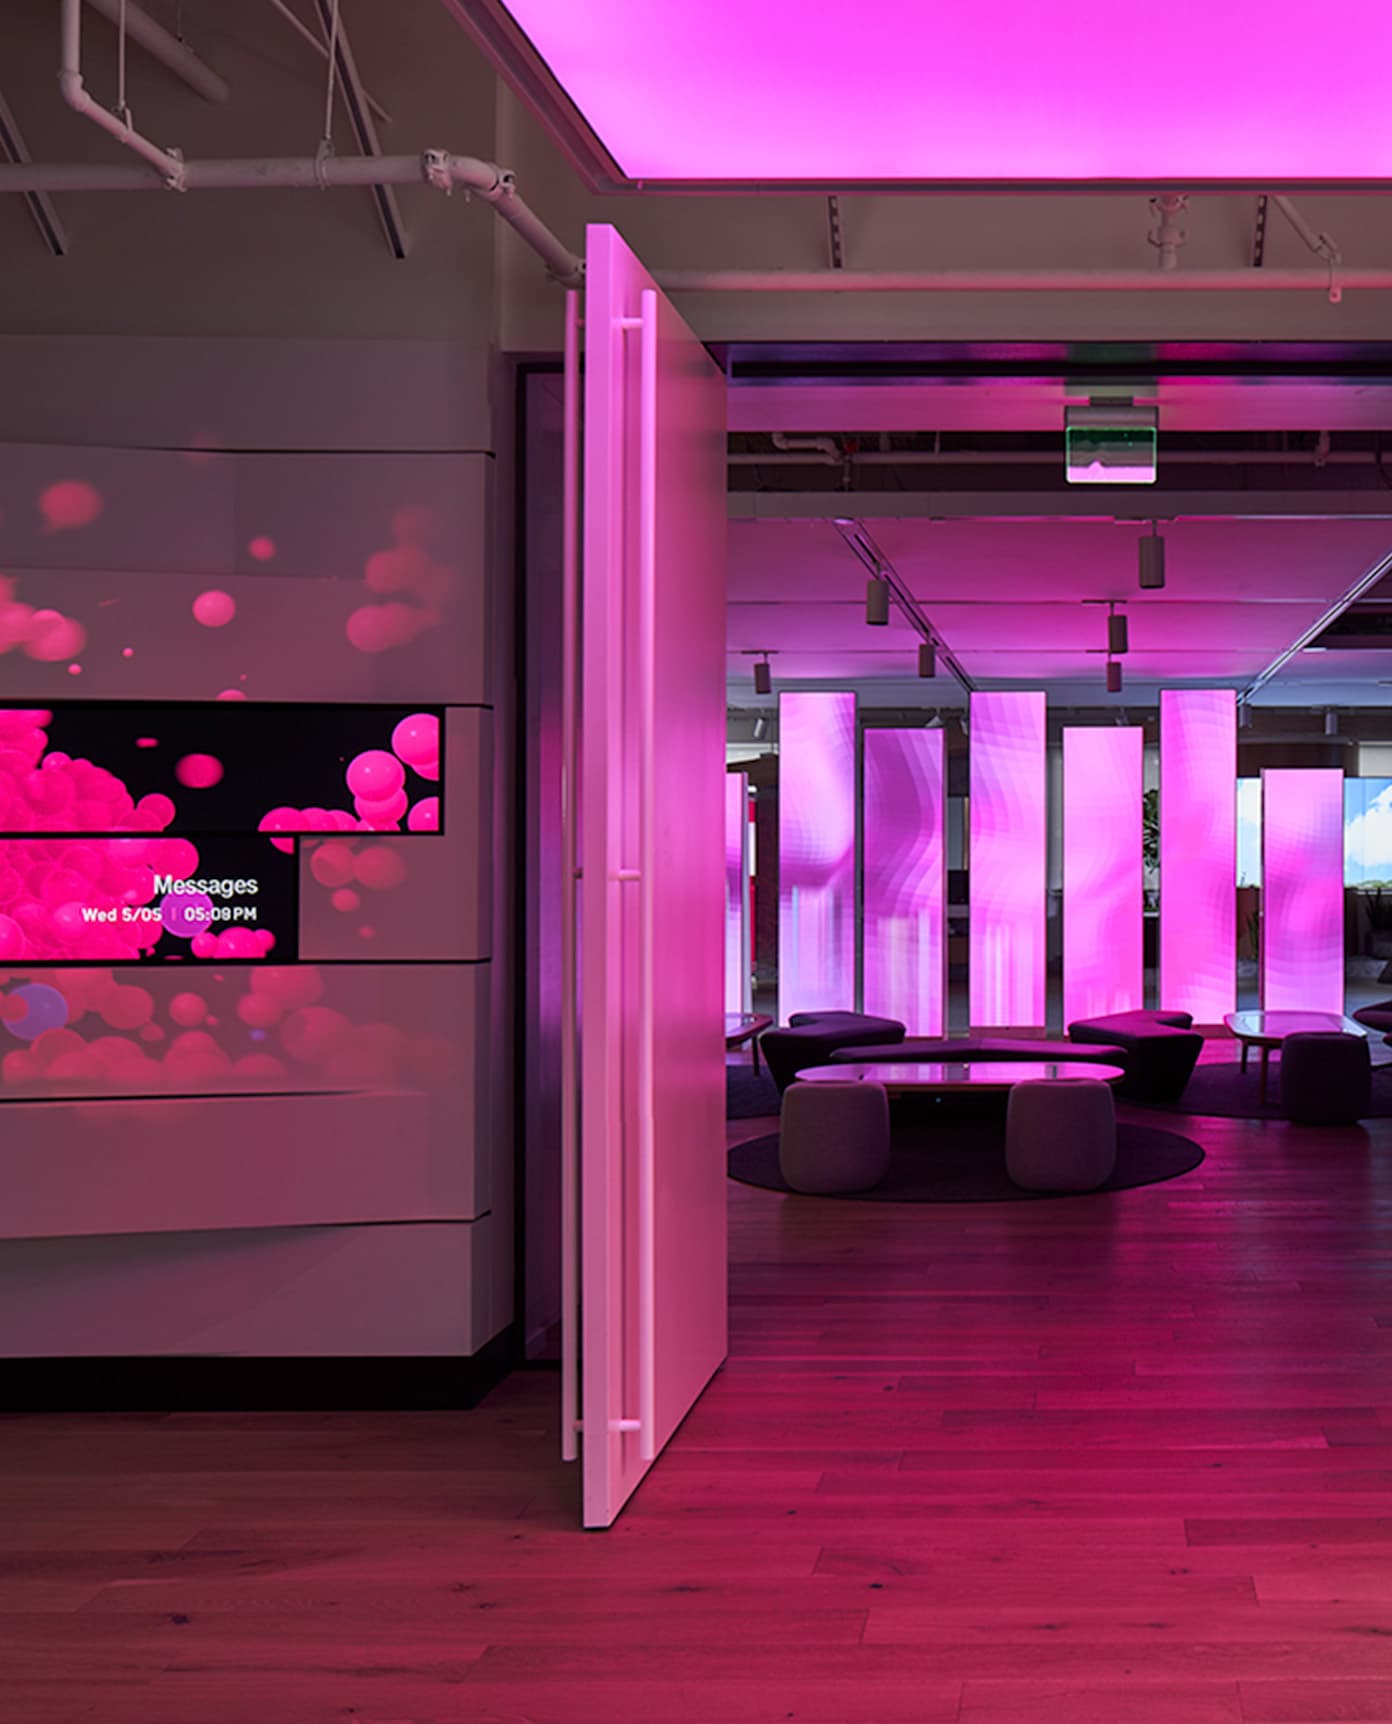 T-Mobile 5G&me Experience Center Image 4